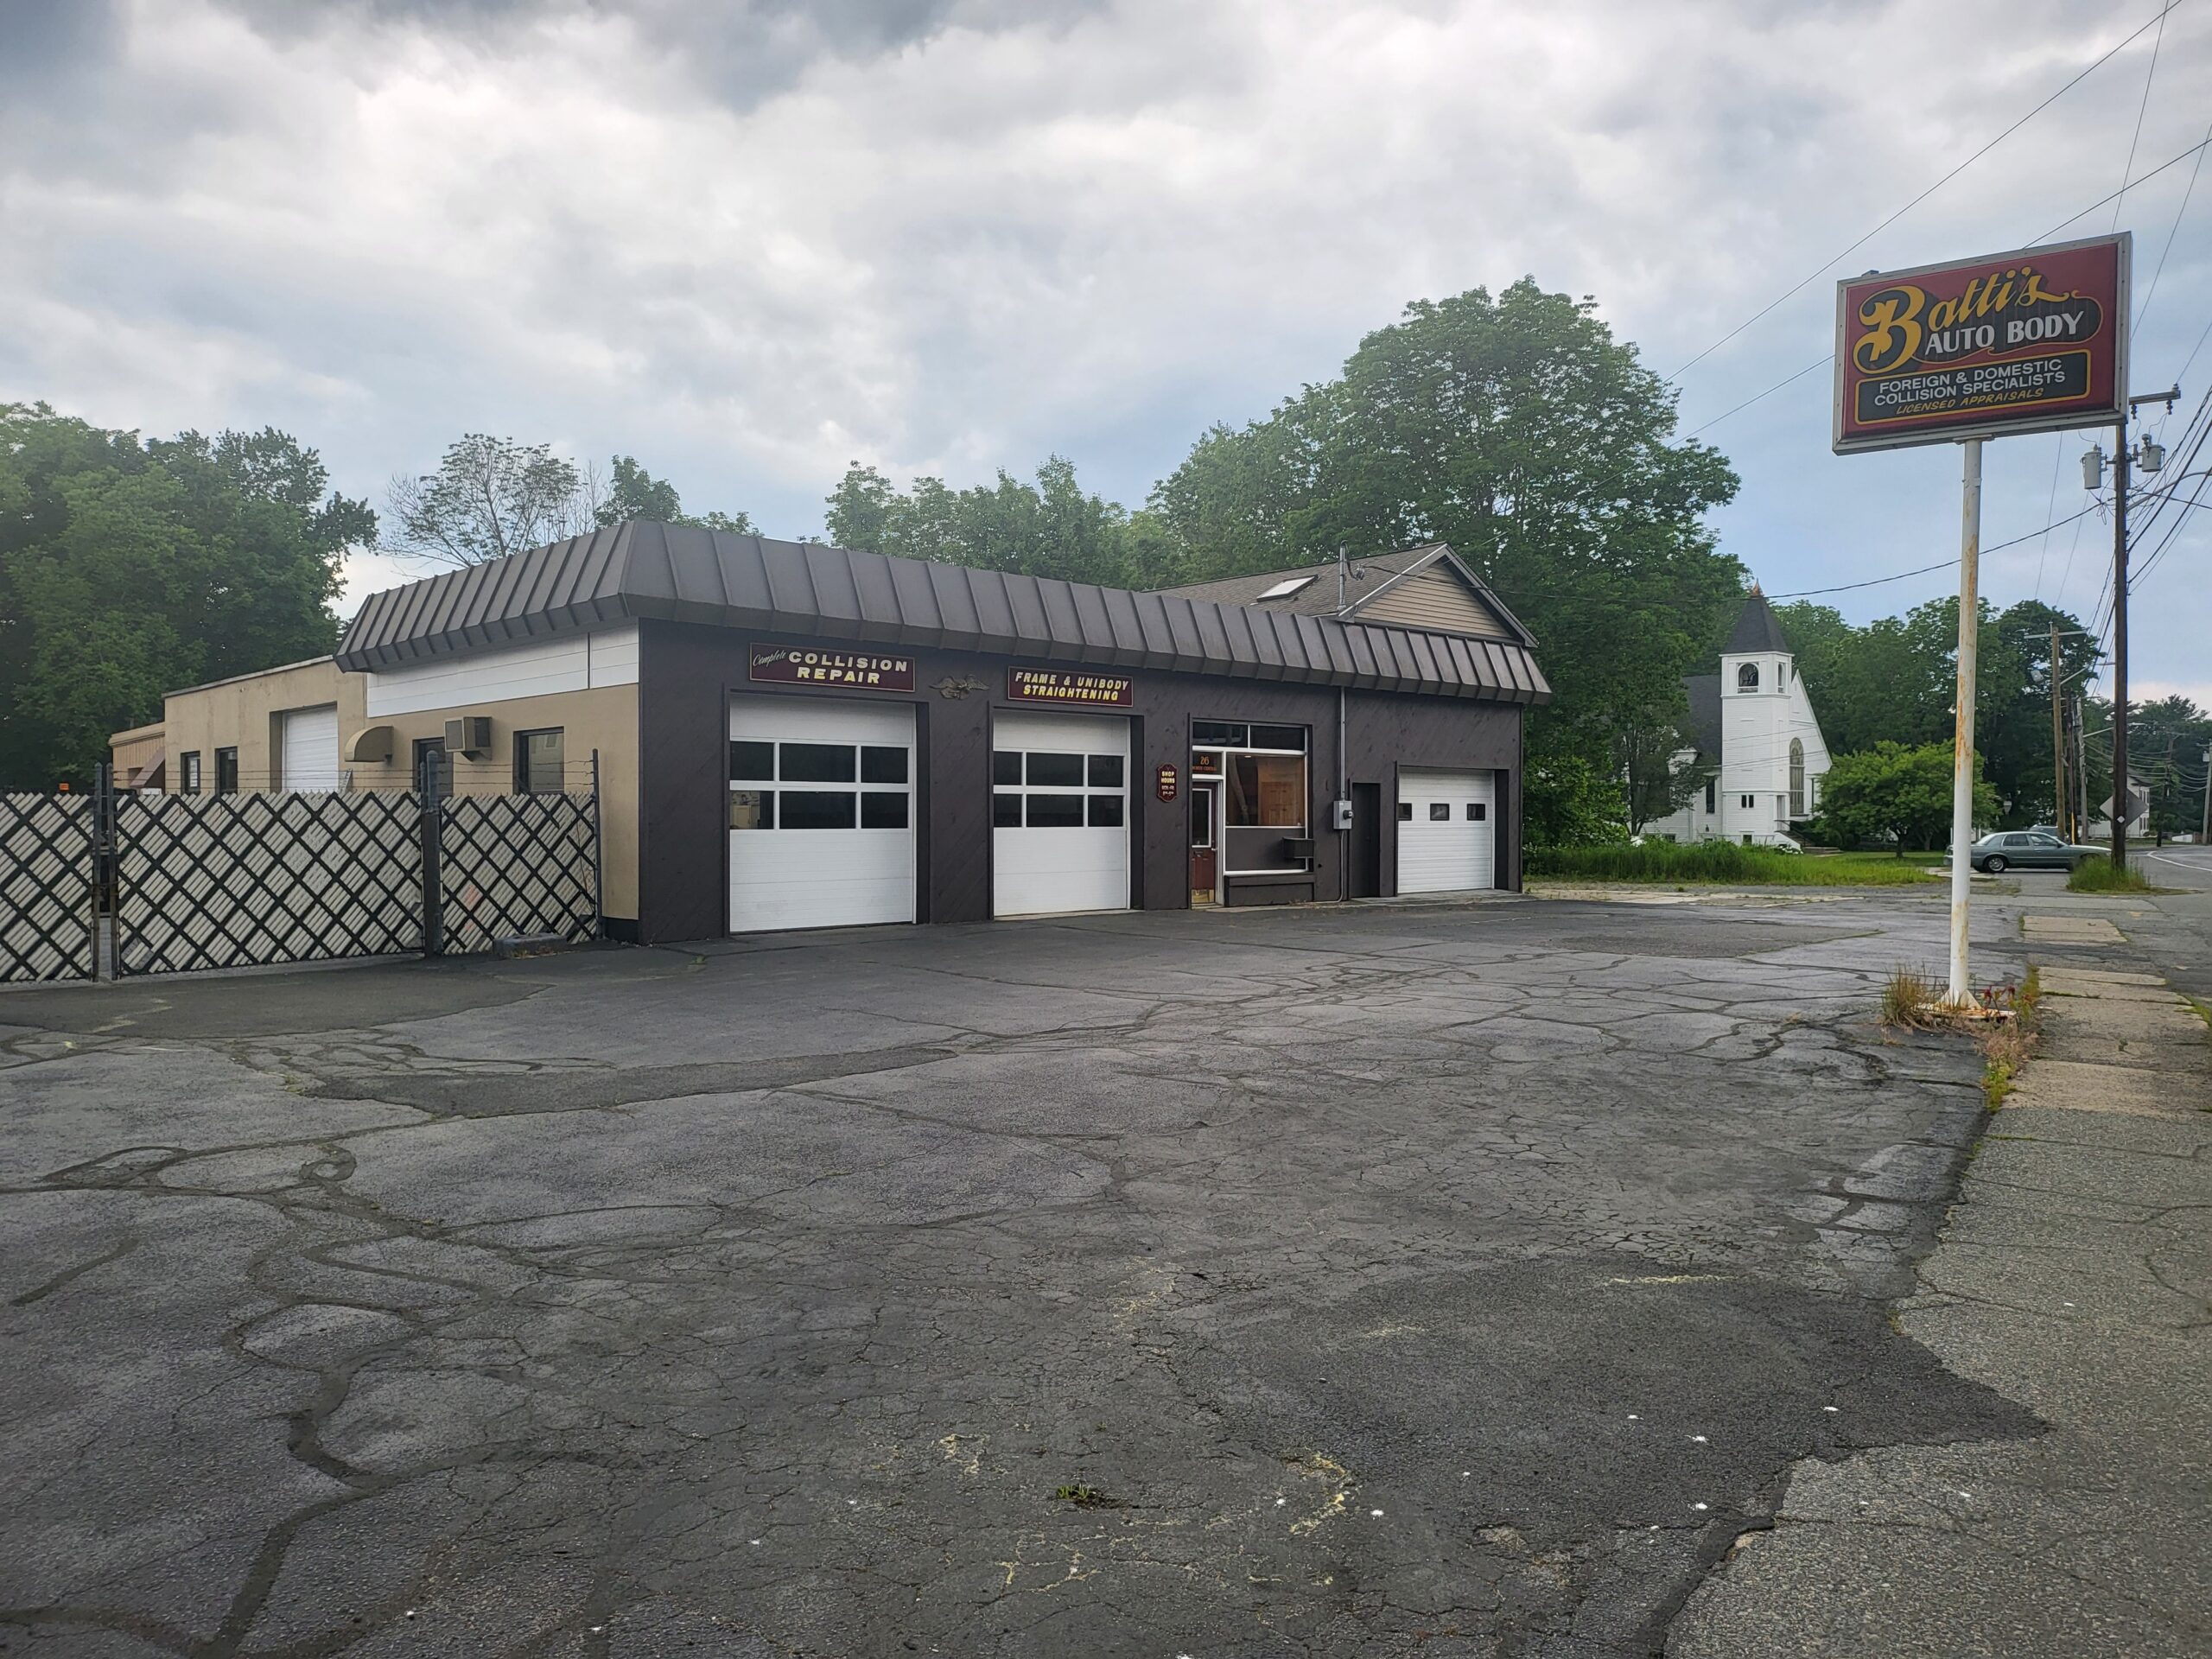 26 N Central St – Batti’s Auto Body Repair Shop, Route 3 South Submarket – Specialty